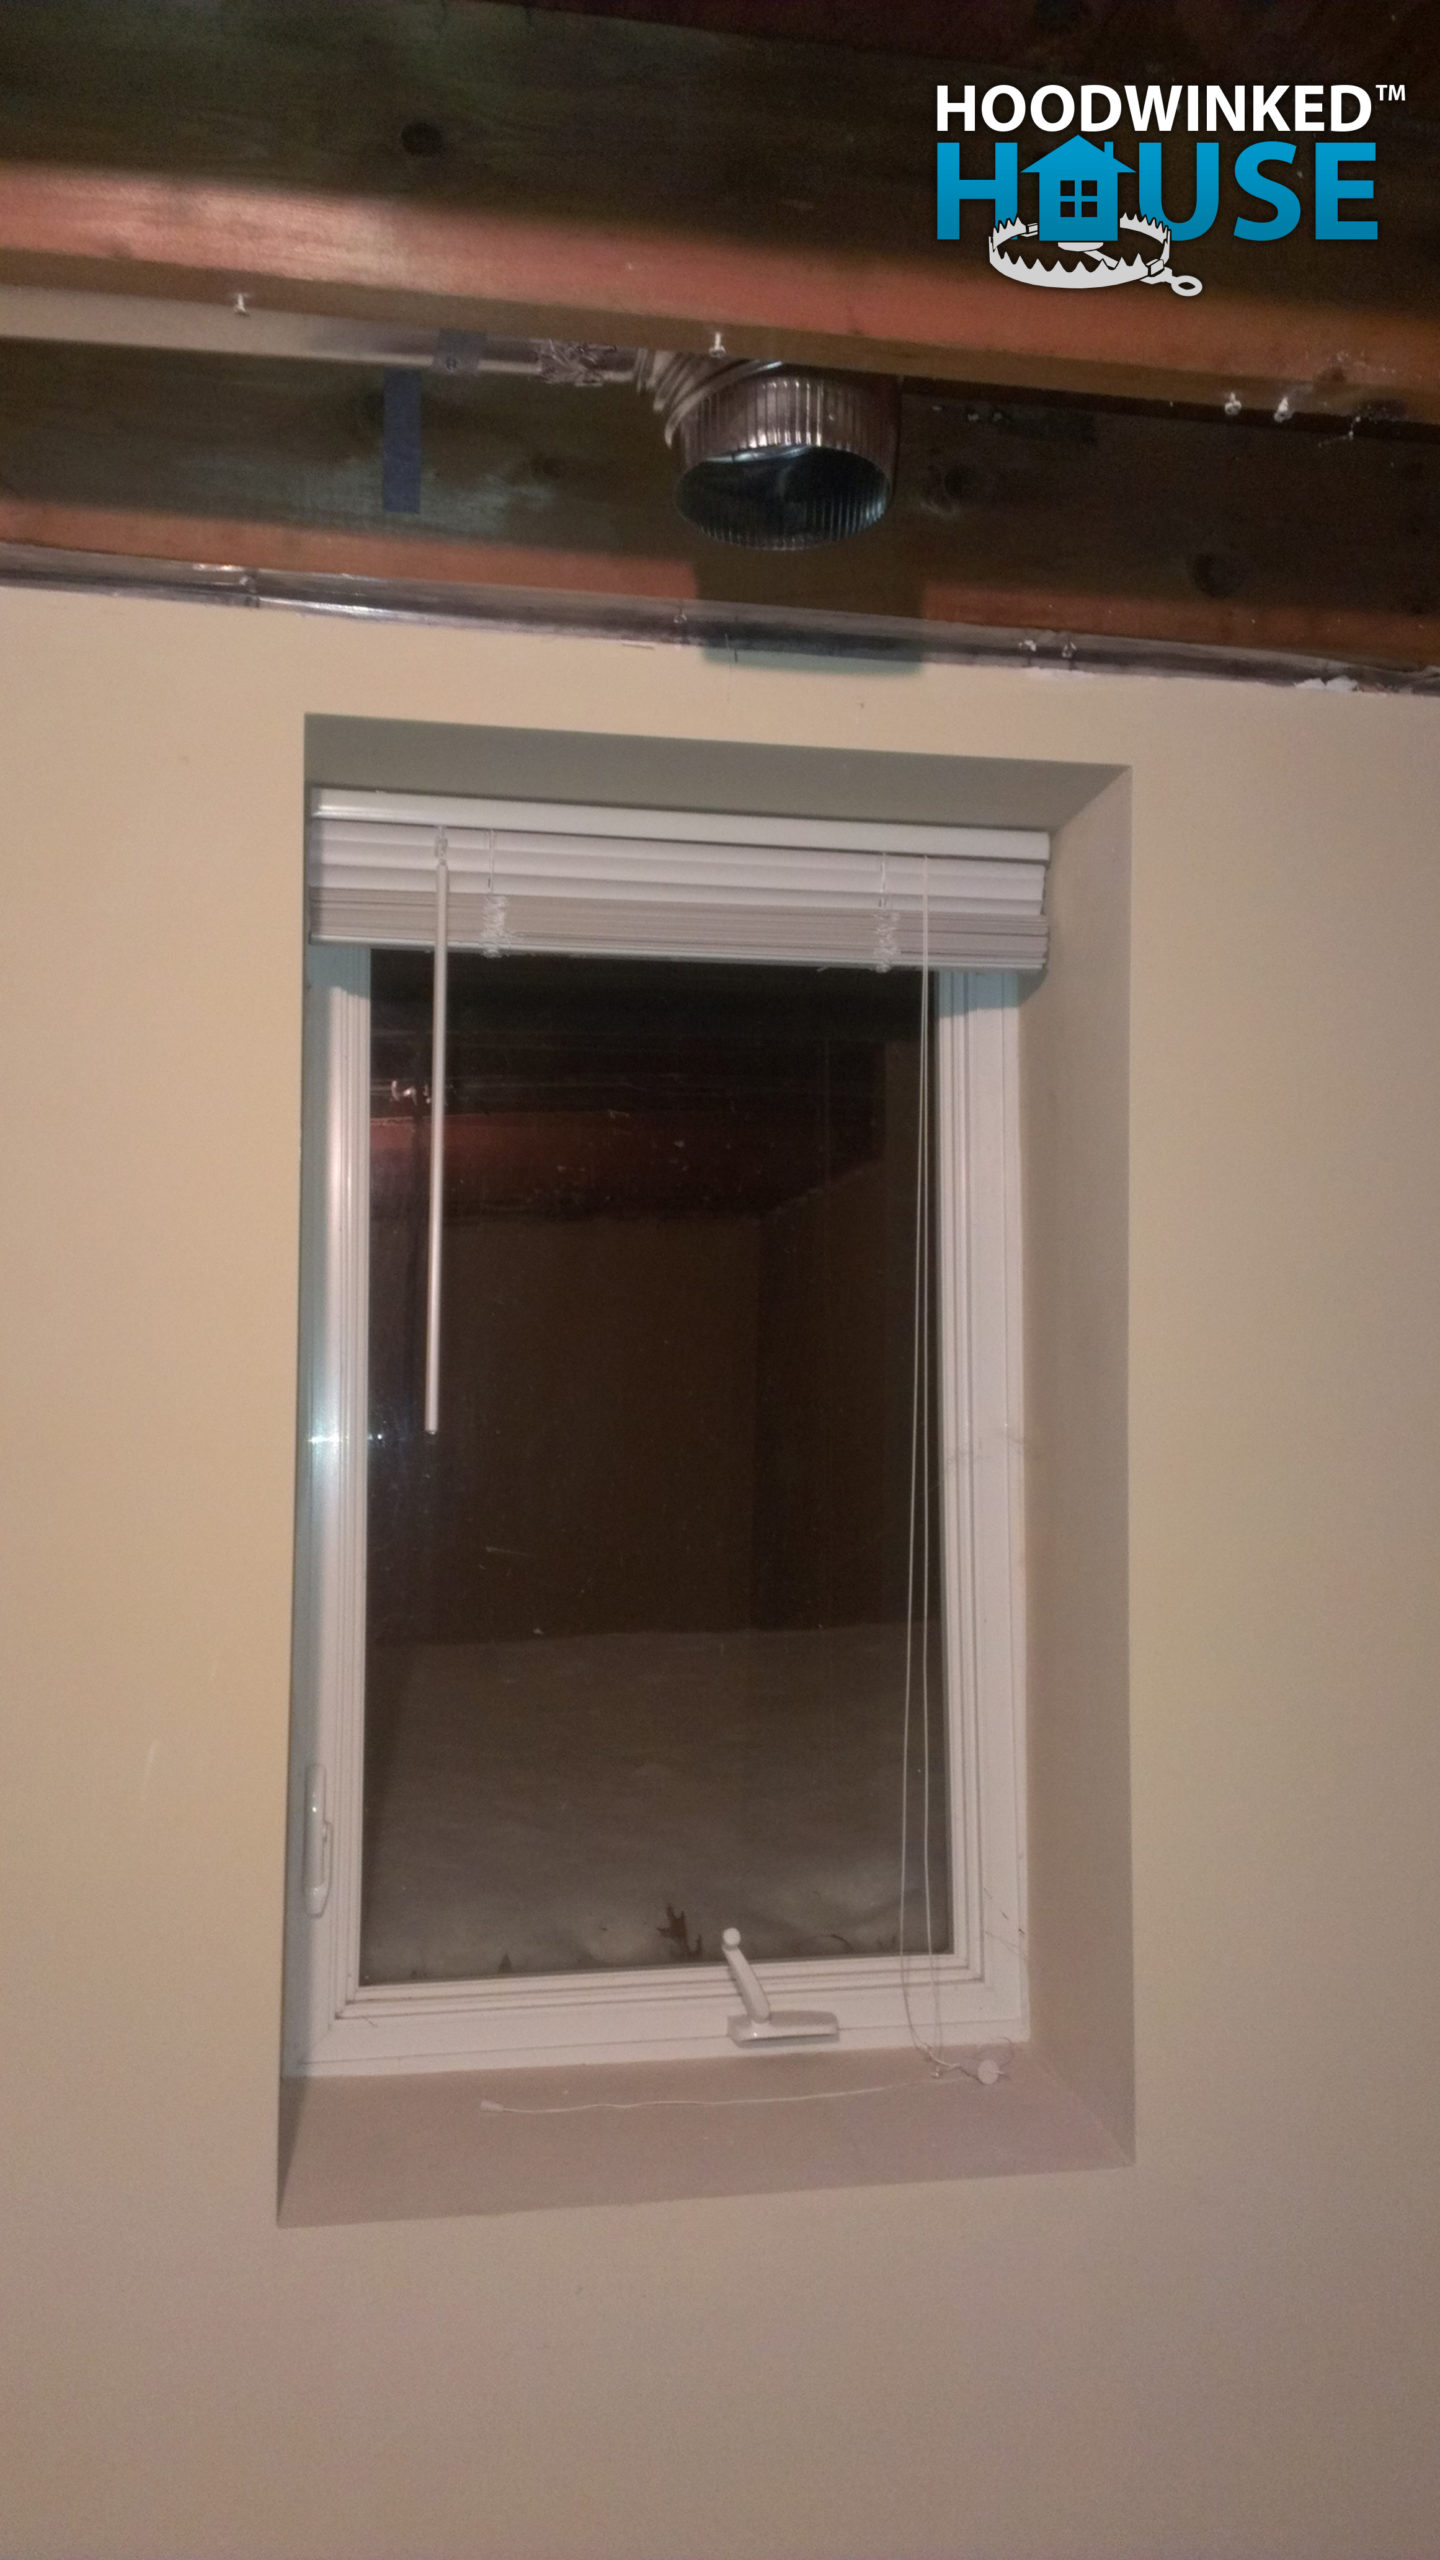 An basement ceiling air duct branch ends in an elbow above a window.